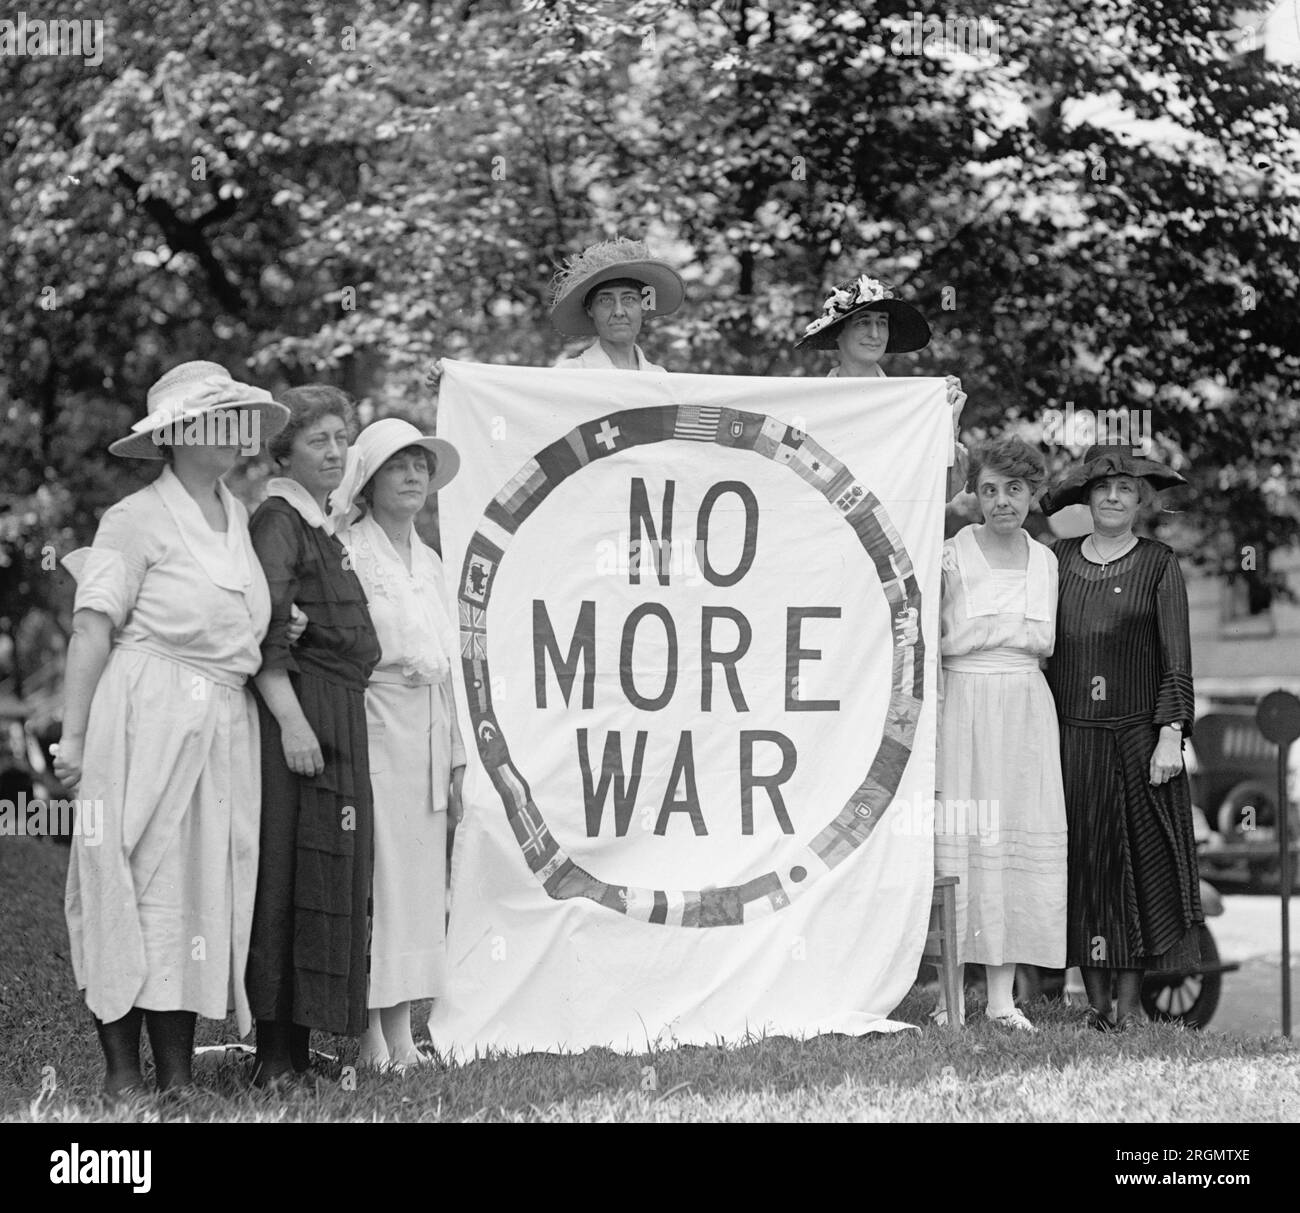 Members of the National League for Limitations of Armament with a "No More War" banner ca. 1922 Stock Photo